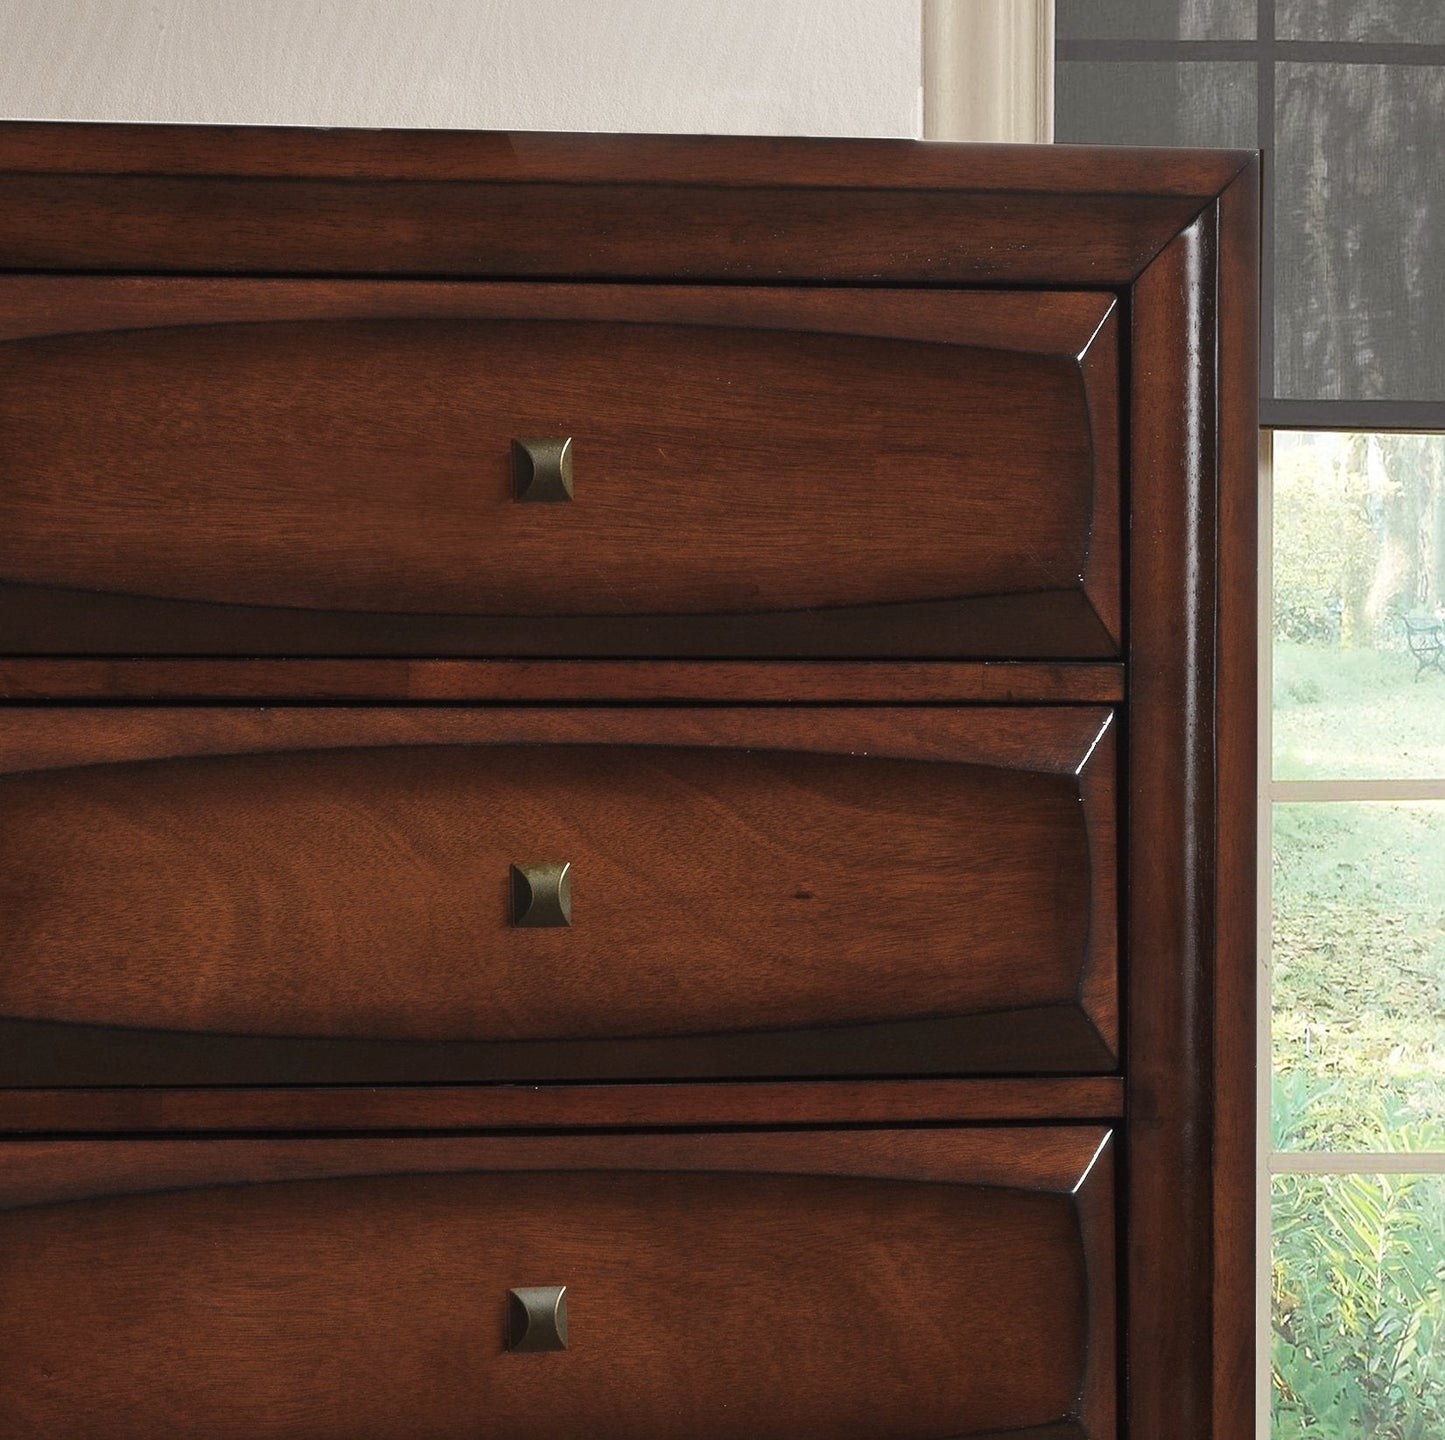 Oakland 139 Antique Oak Finish Wood 8 Drawers Dresser and Mirror